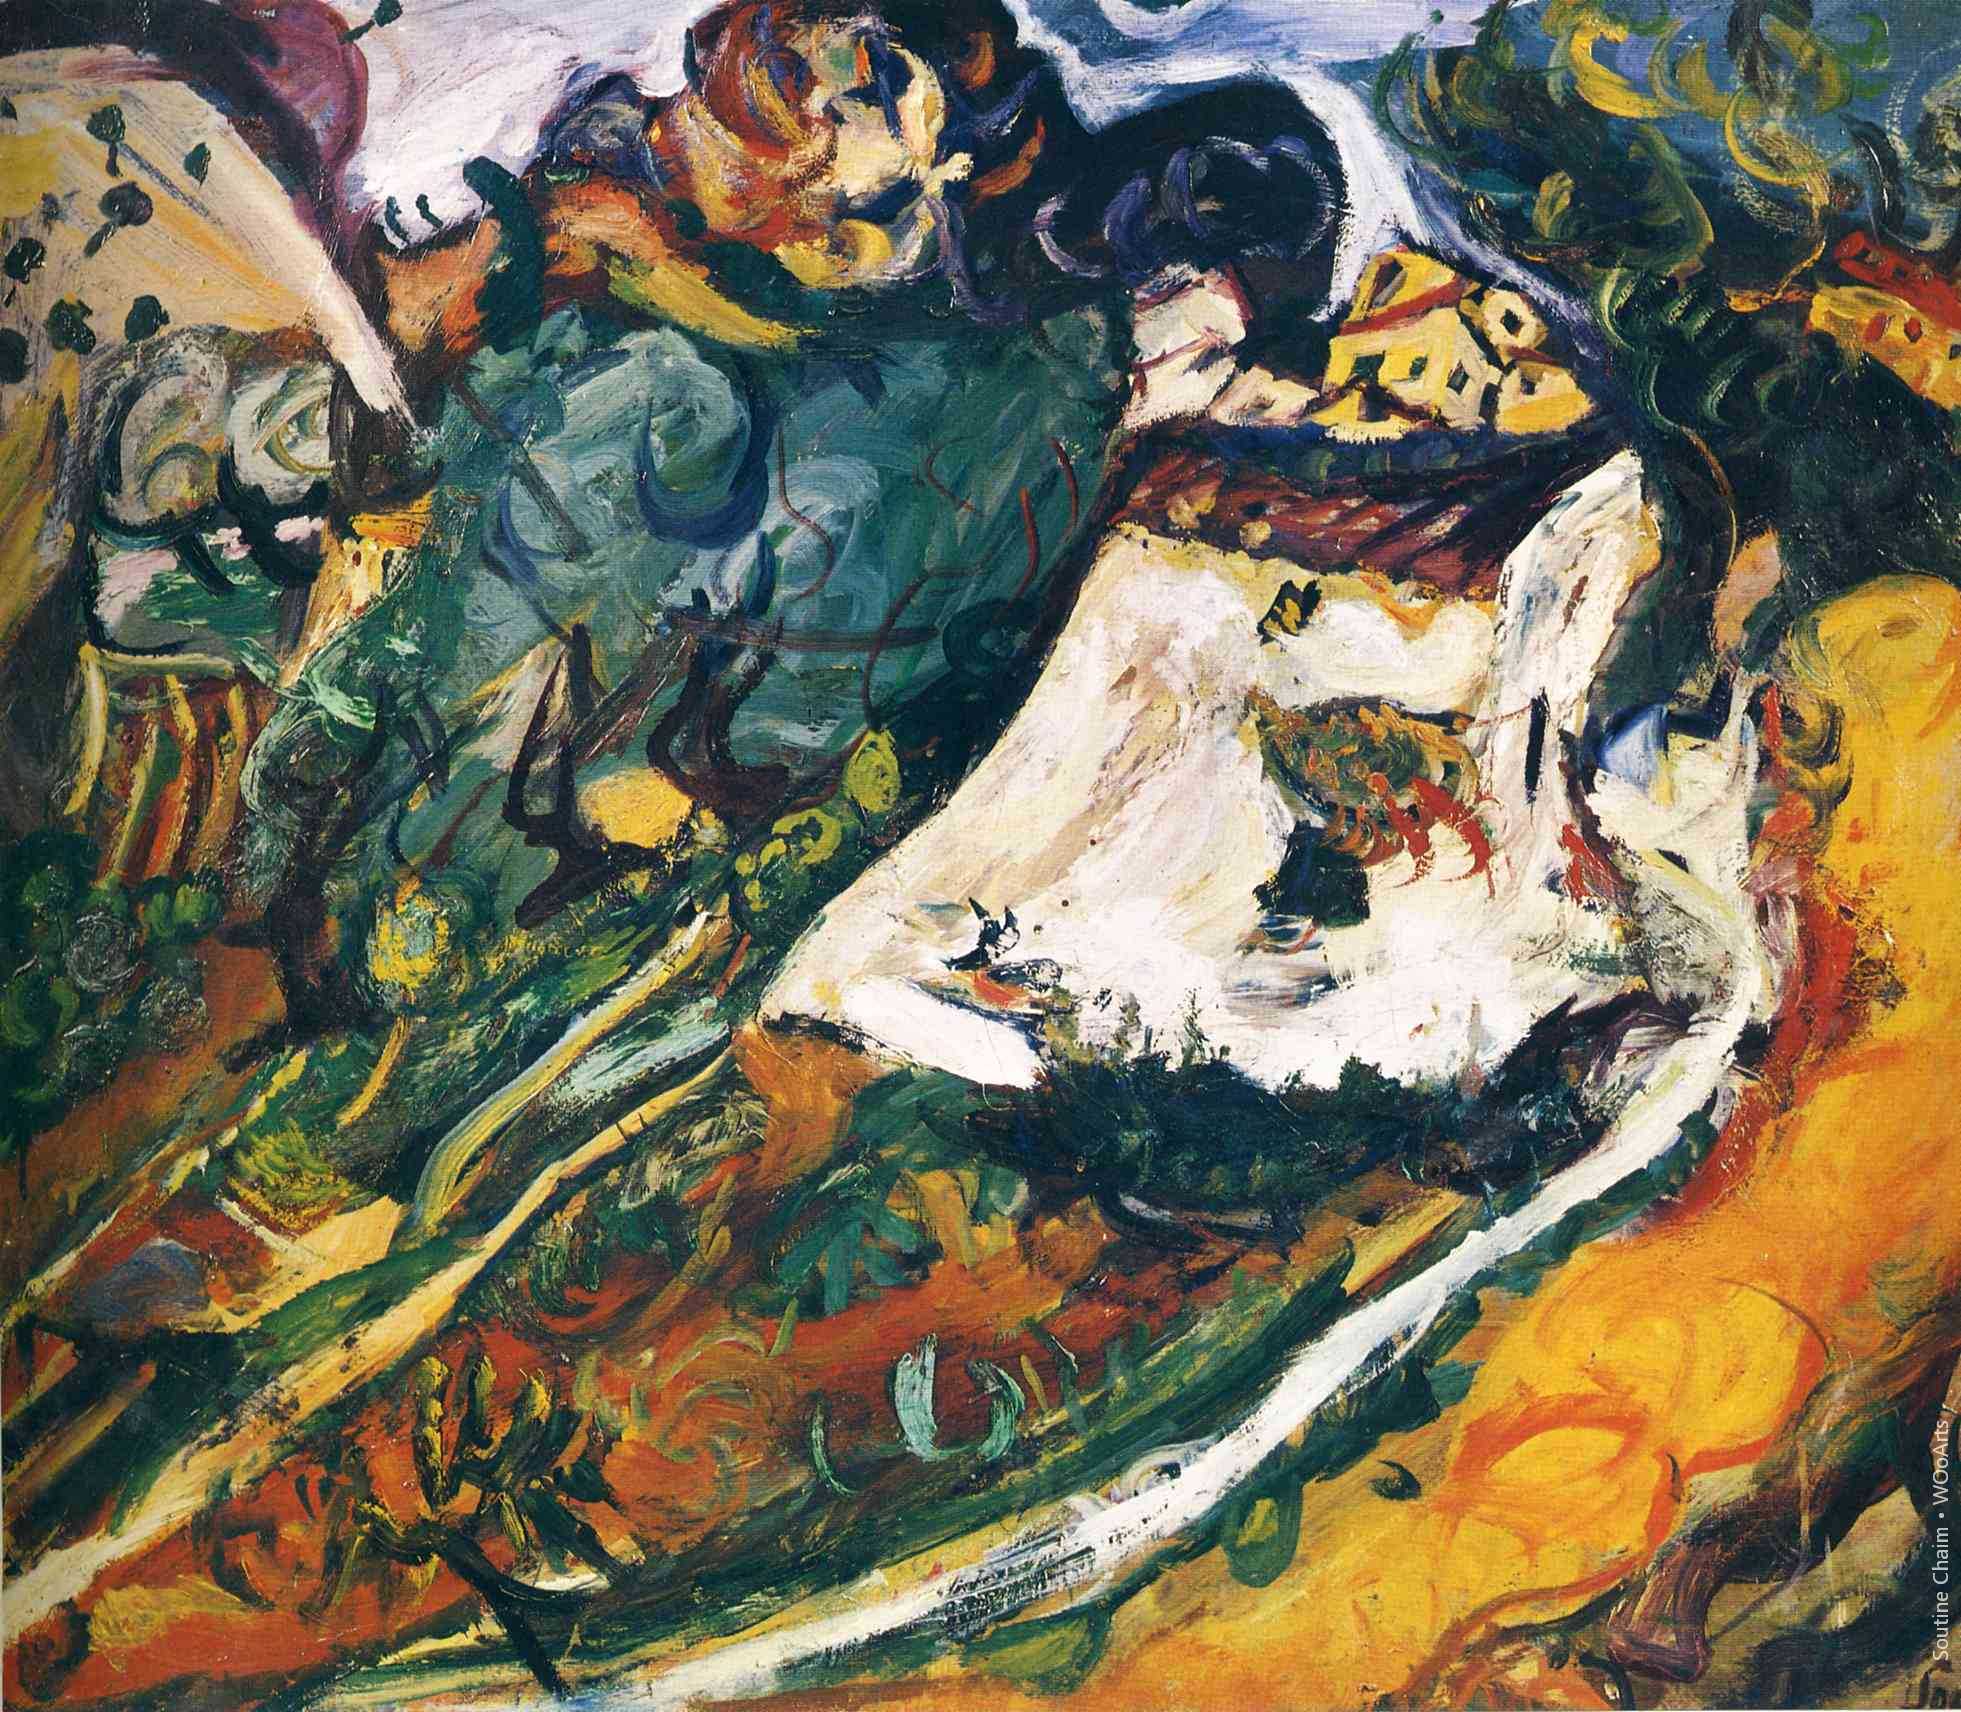 Painting by Soutine Chaim